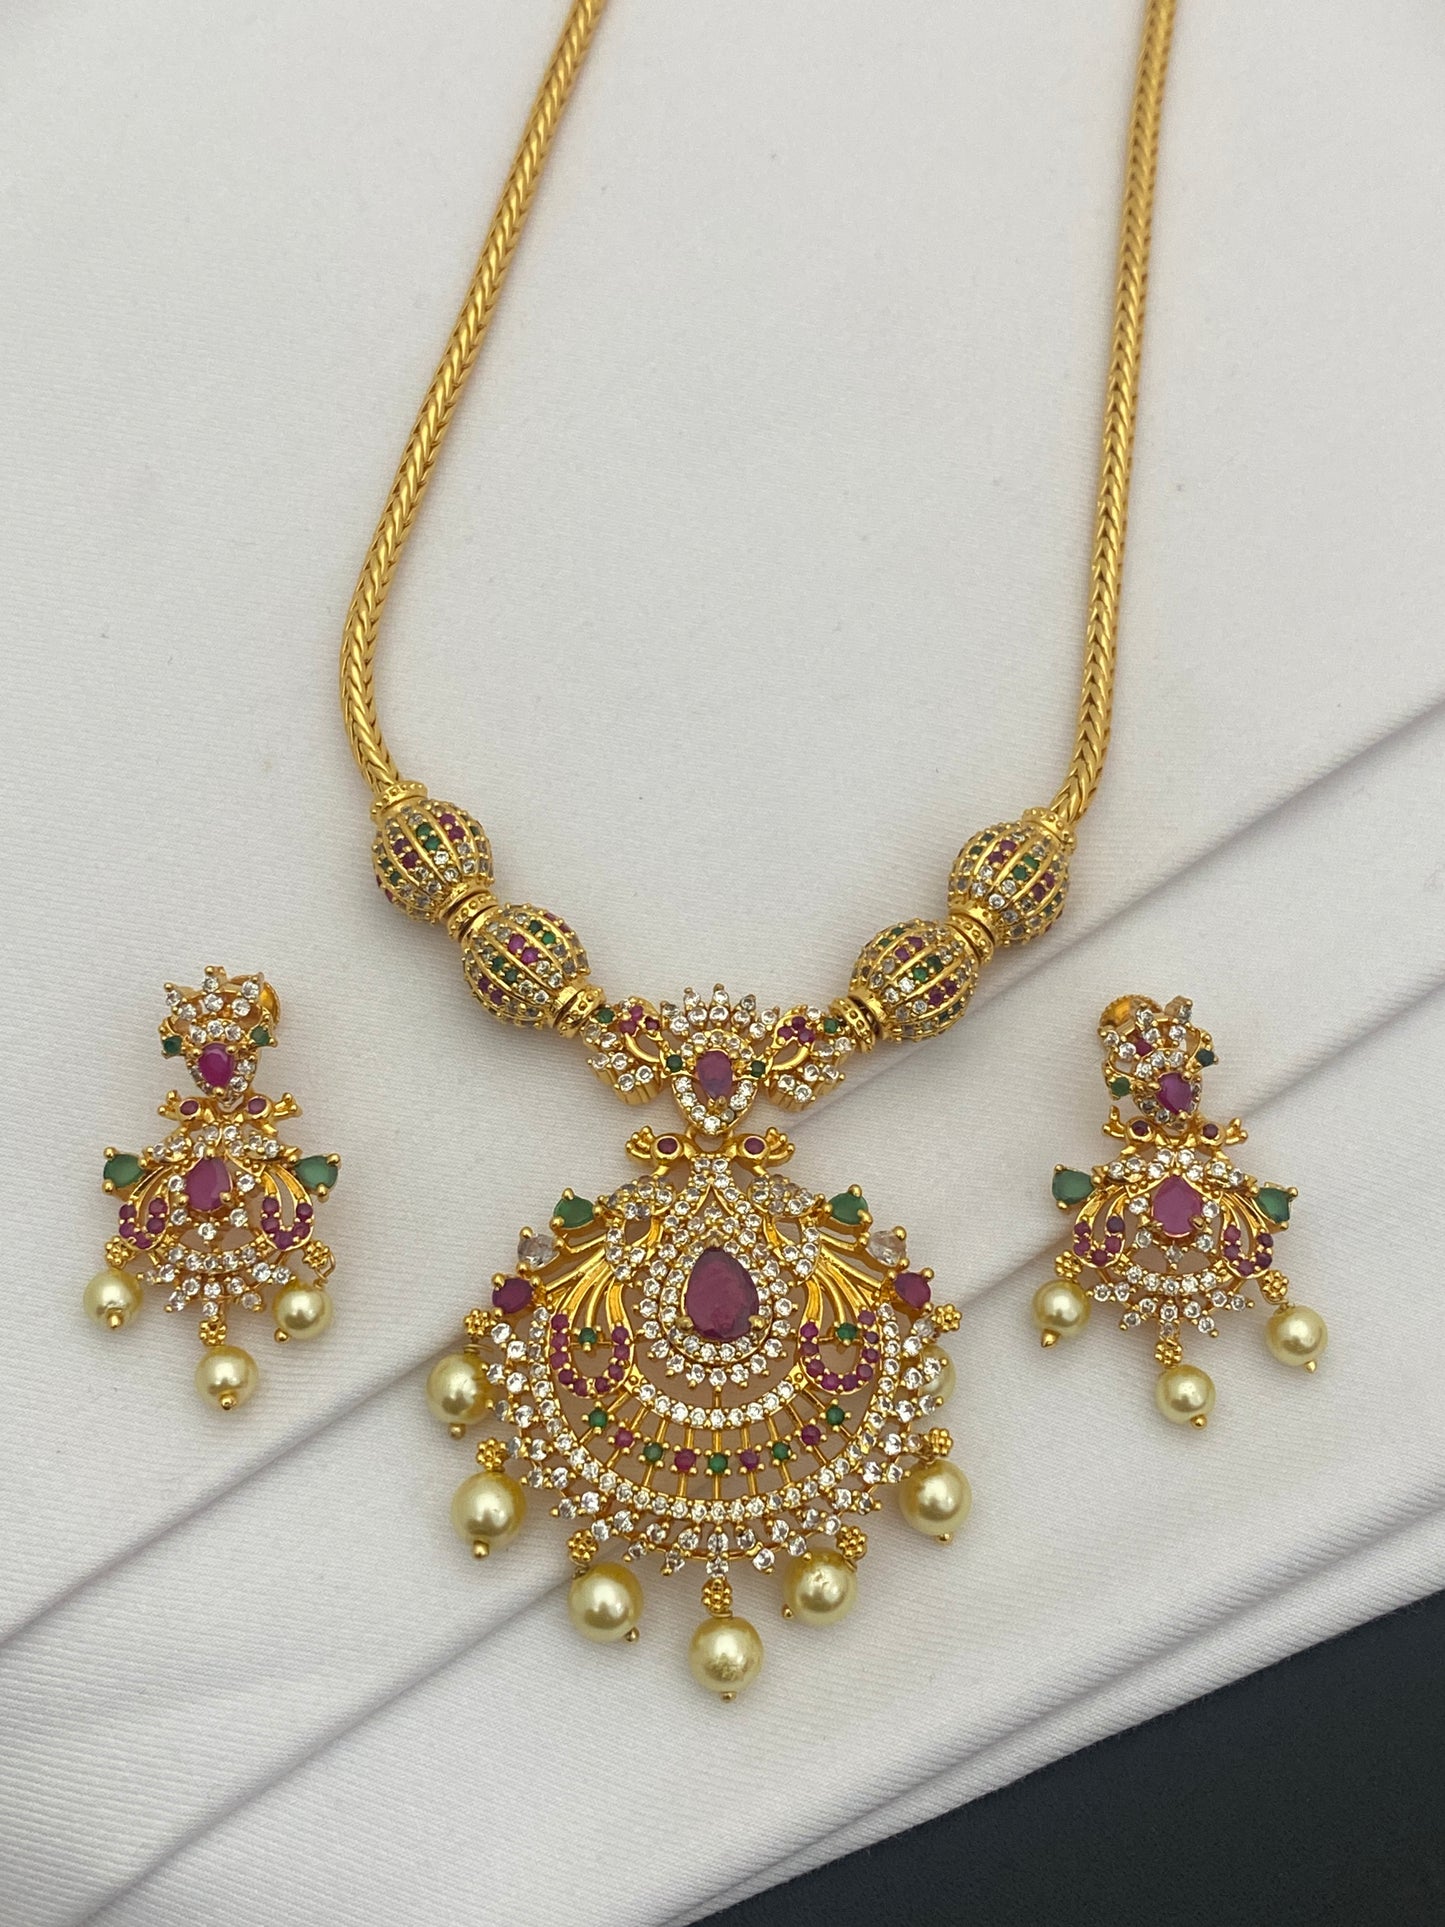 Dazzling Gold Plated Peacock Designer Chain Near Me